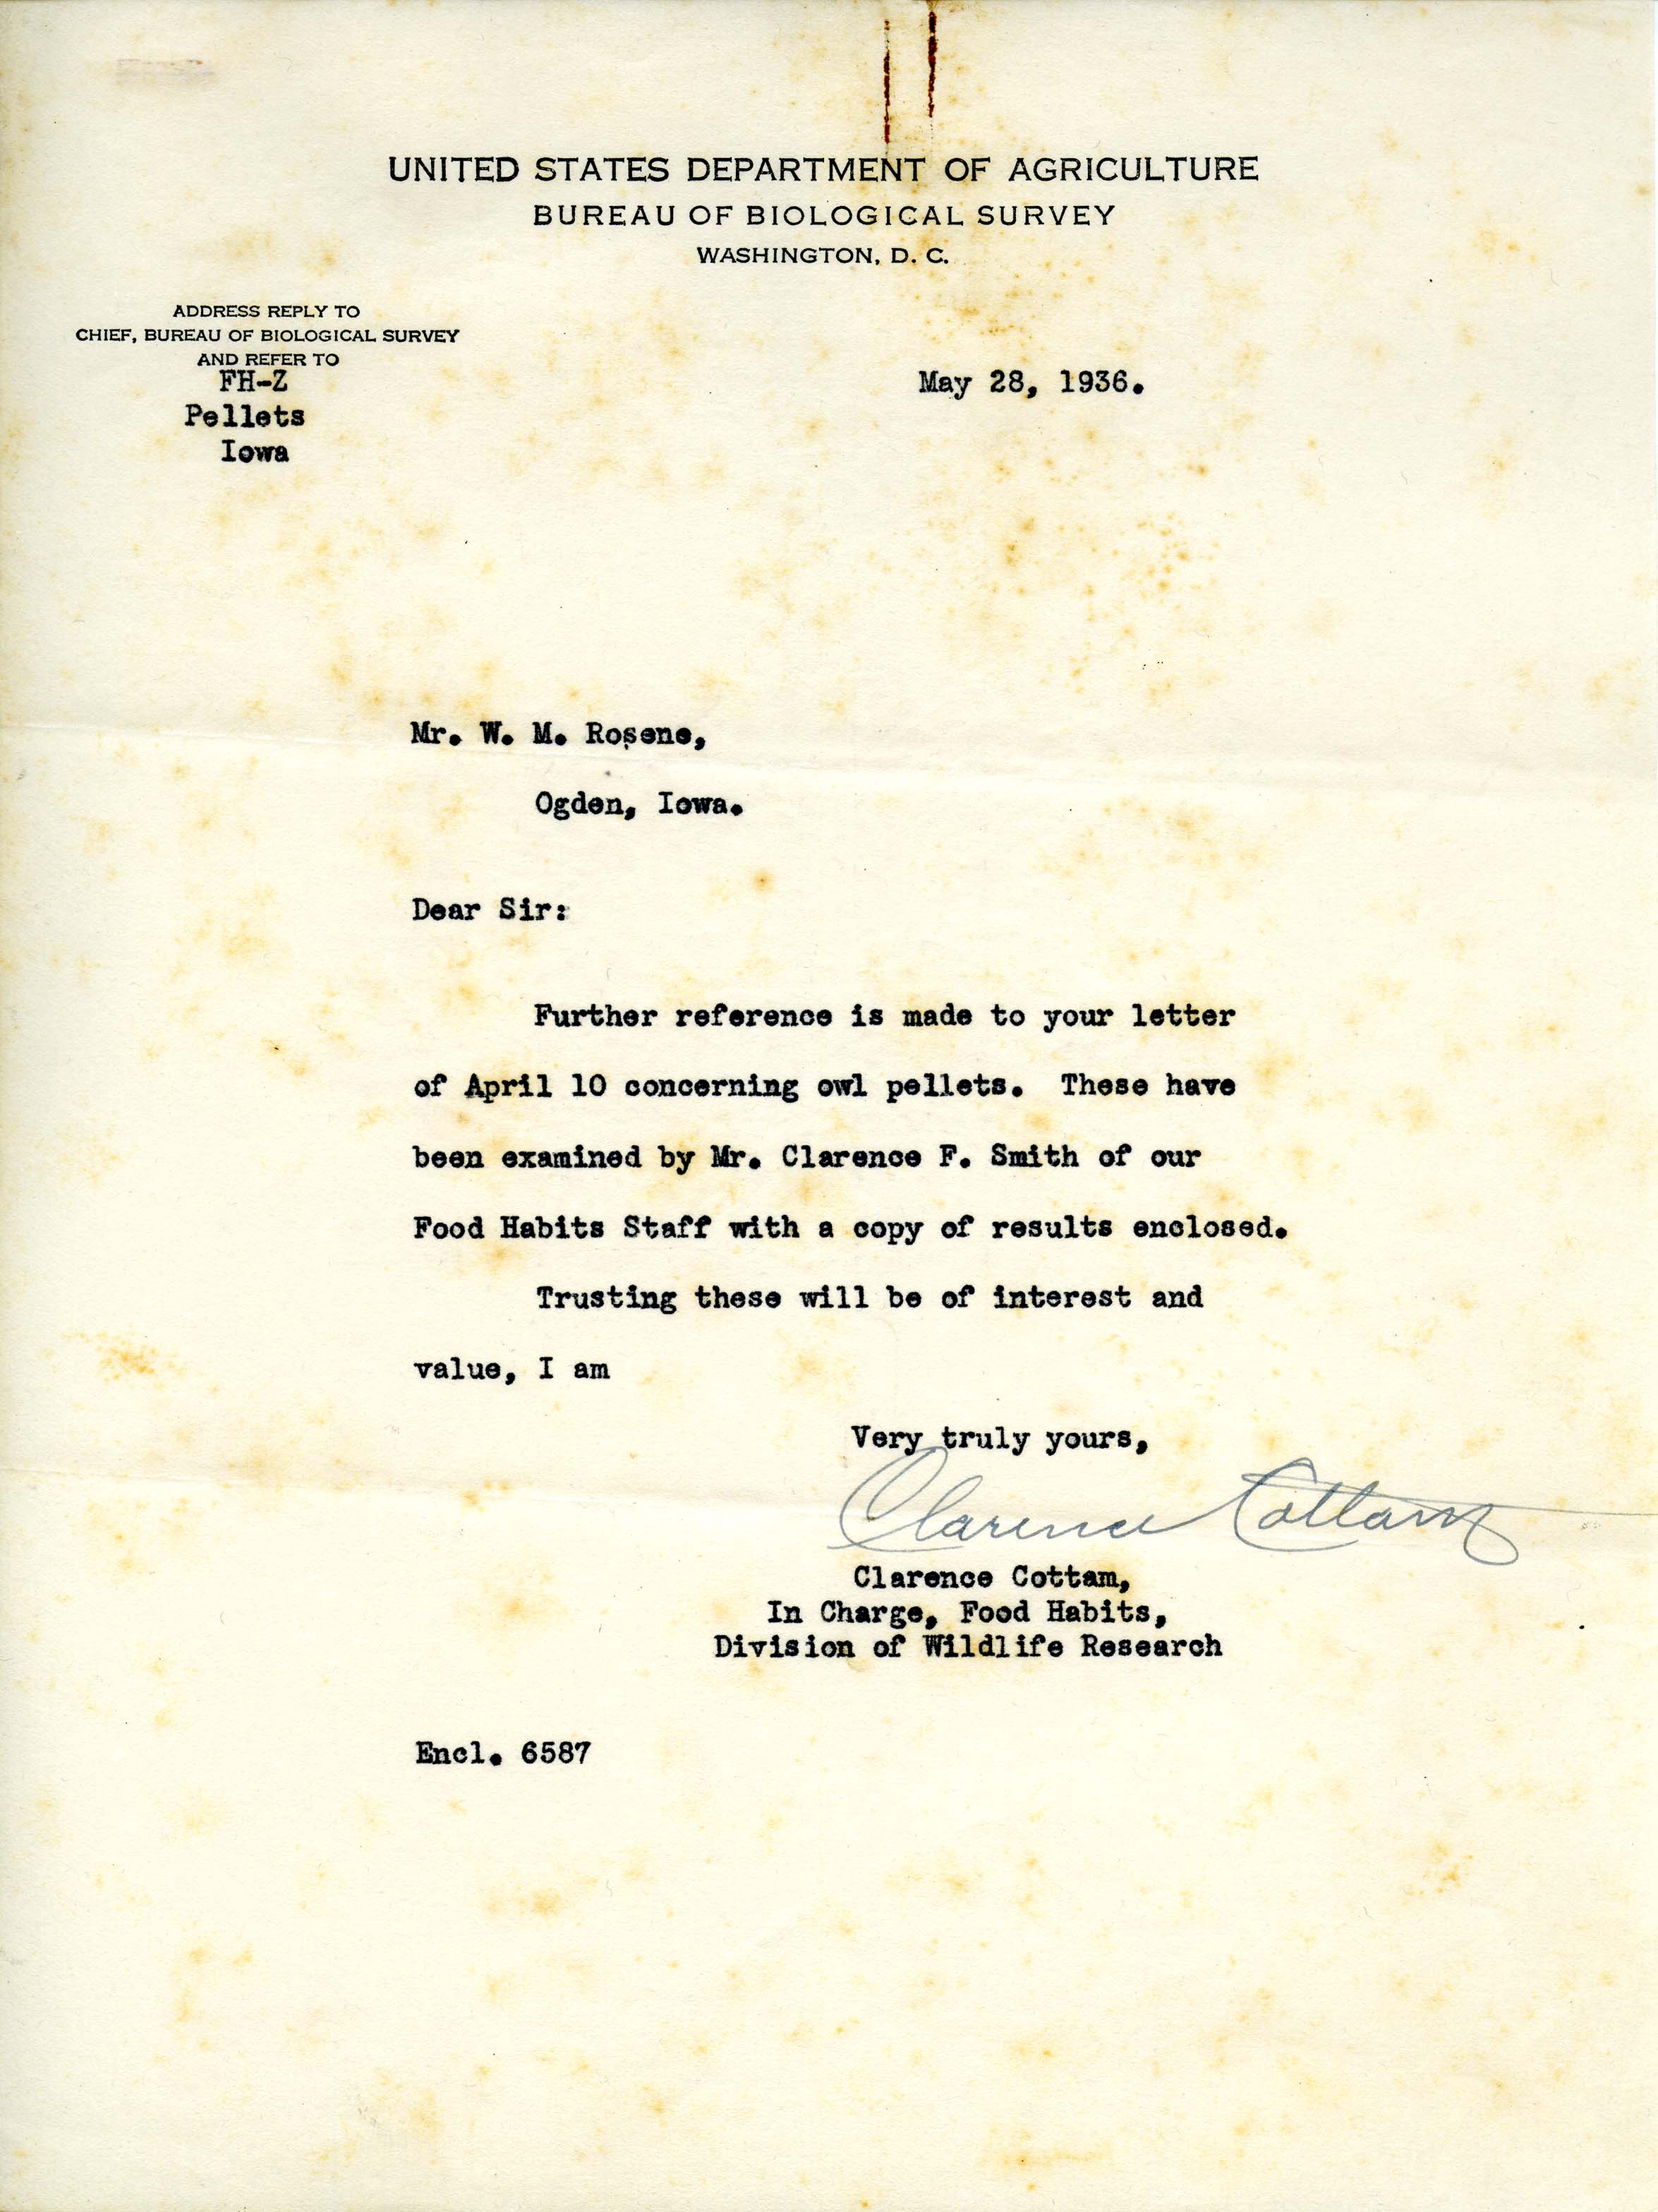 Clarence Cottam letter to Walter Rosene regarding the analysis and contents of Long-eared Owl pellets, May 28, 1936